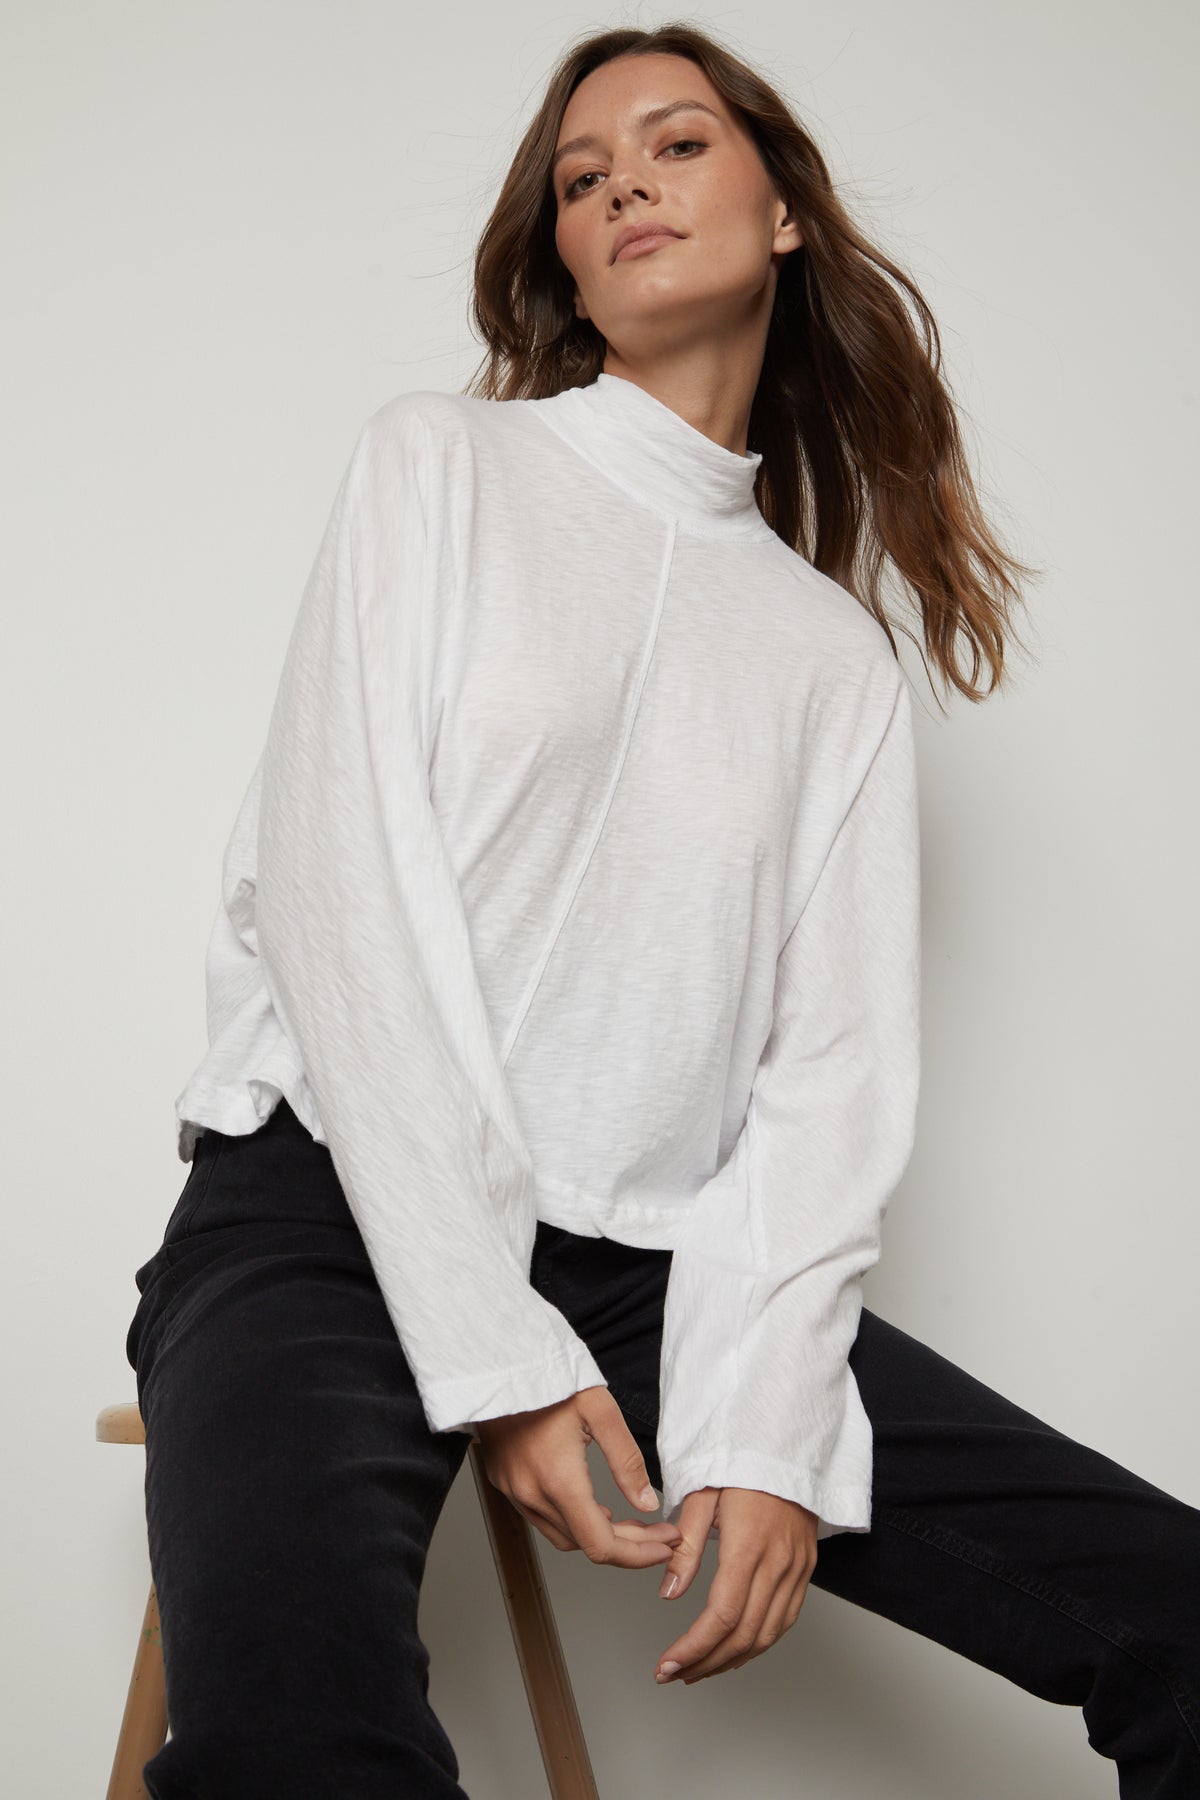 A person with long hair wears a white STACEY MOCK NECK TEE by Velvet by Graham & Spencer and black pants, seated against a plain background.-36328480768193